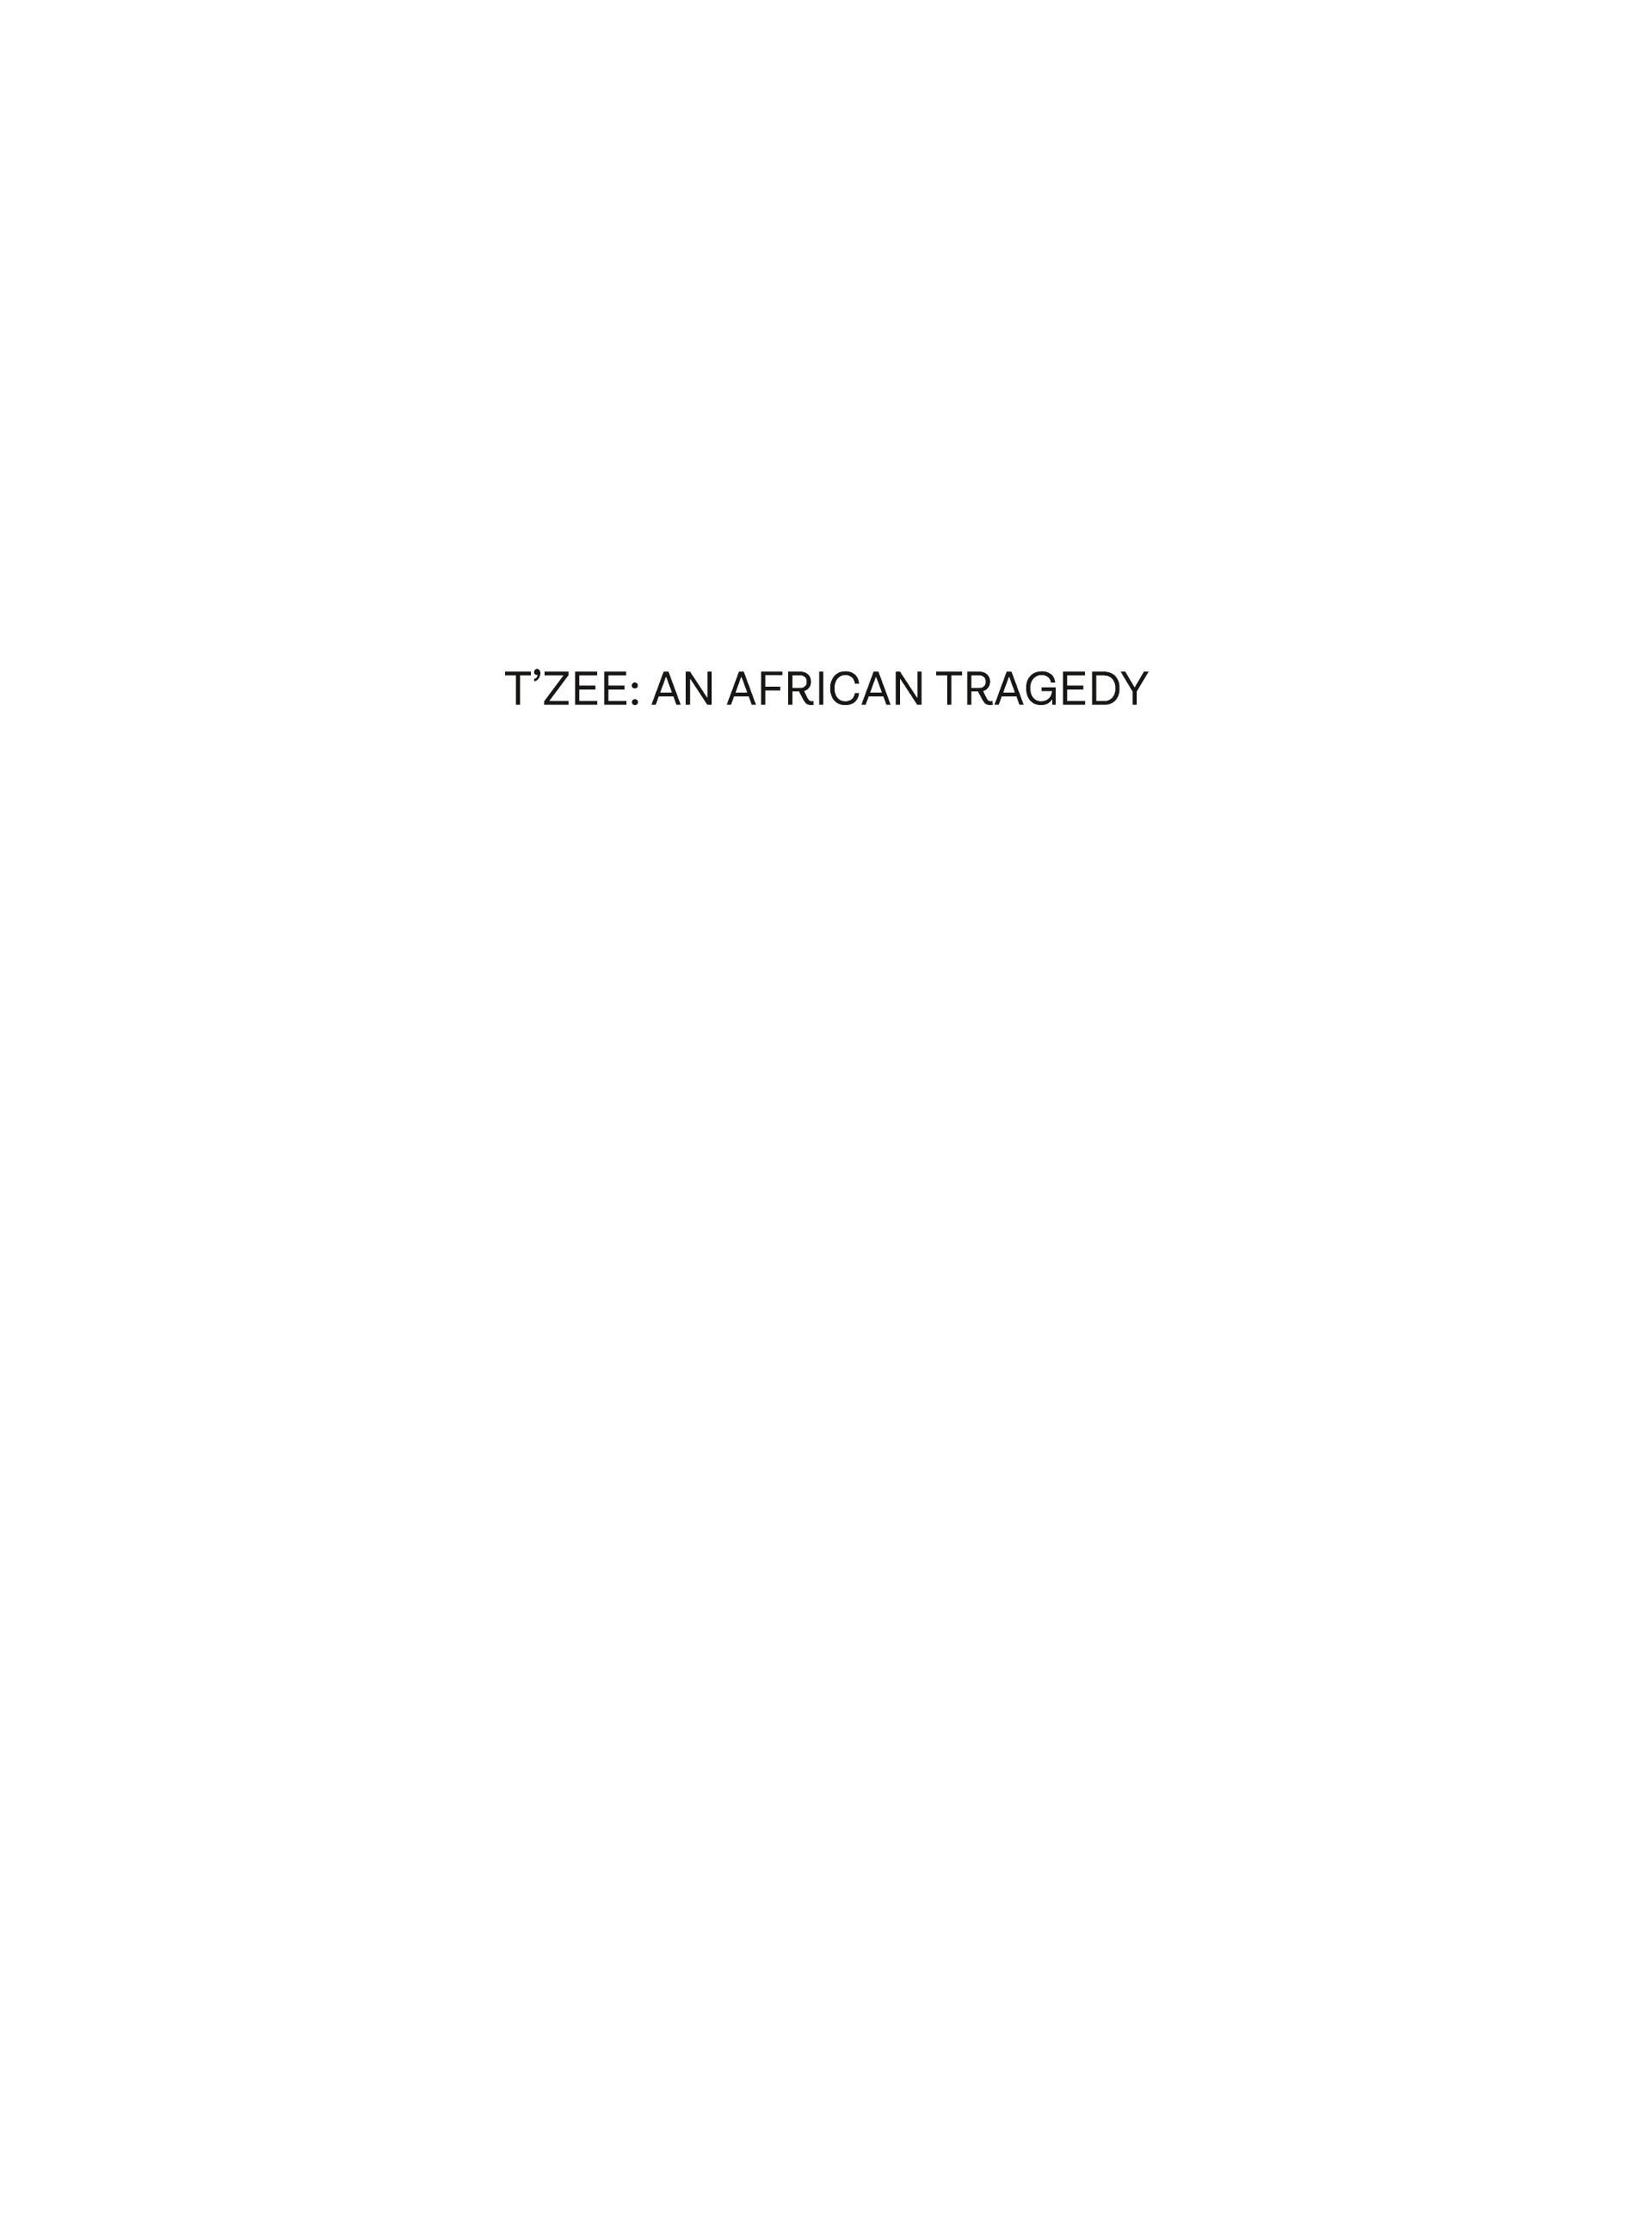 Read online T'Zee: An African Tragedy comic -  Issue # TPB (Part 1) - 2